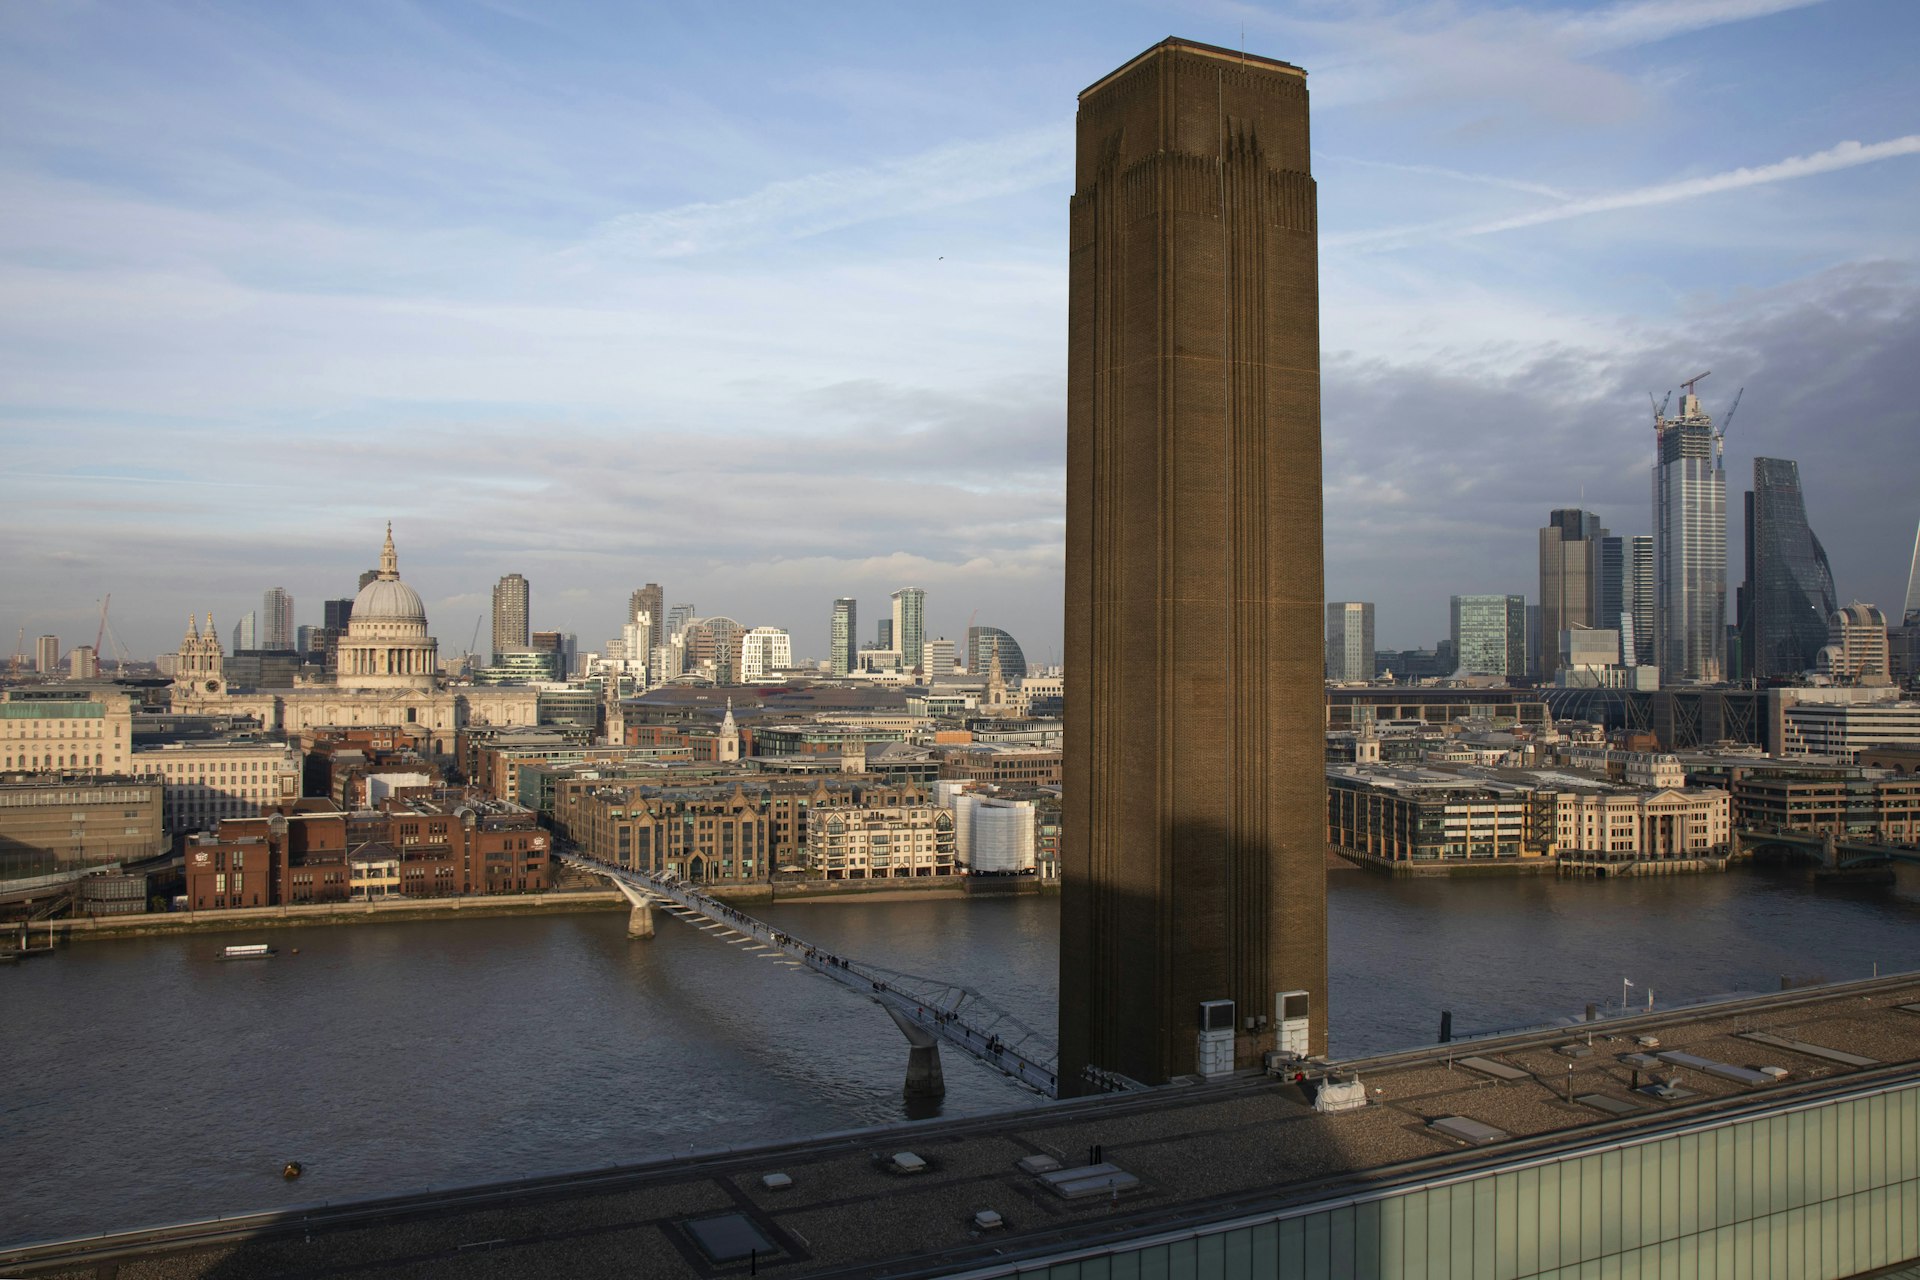 View of the Tate Modern tower with the City of London behind it, as seen from the viewing balcony of Tate Modern